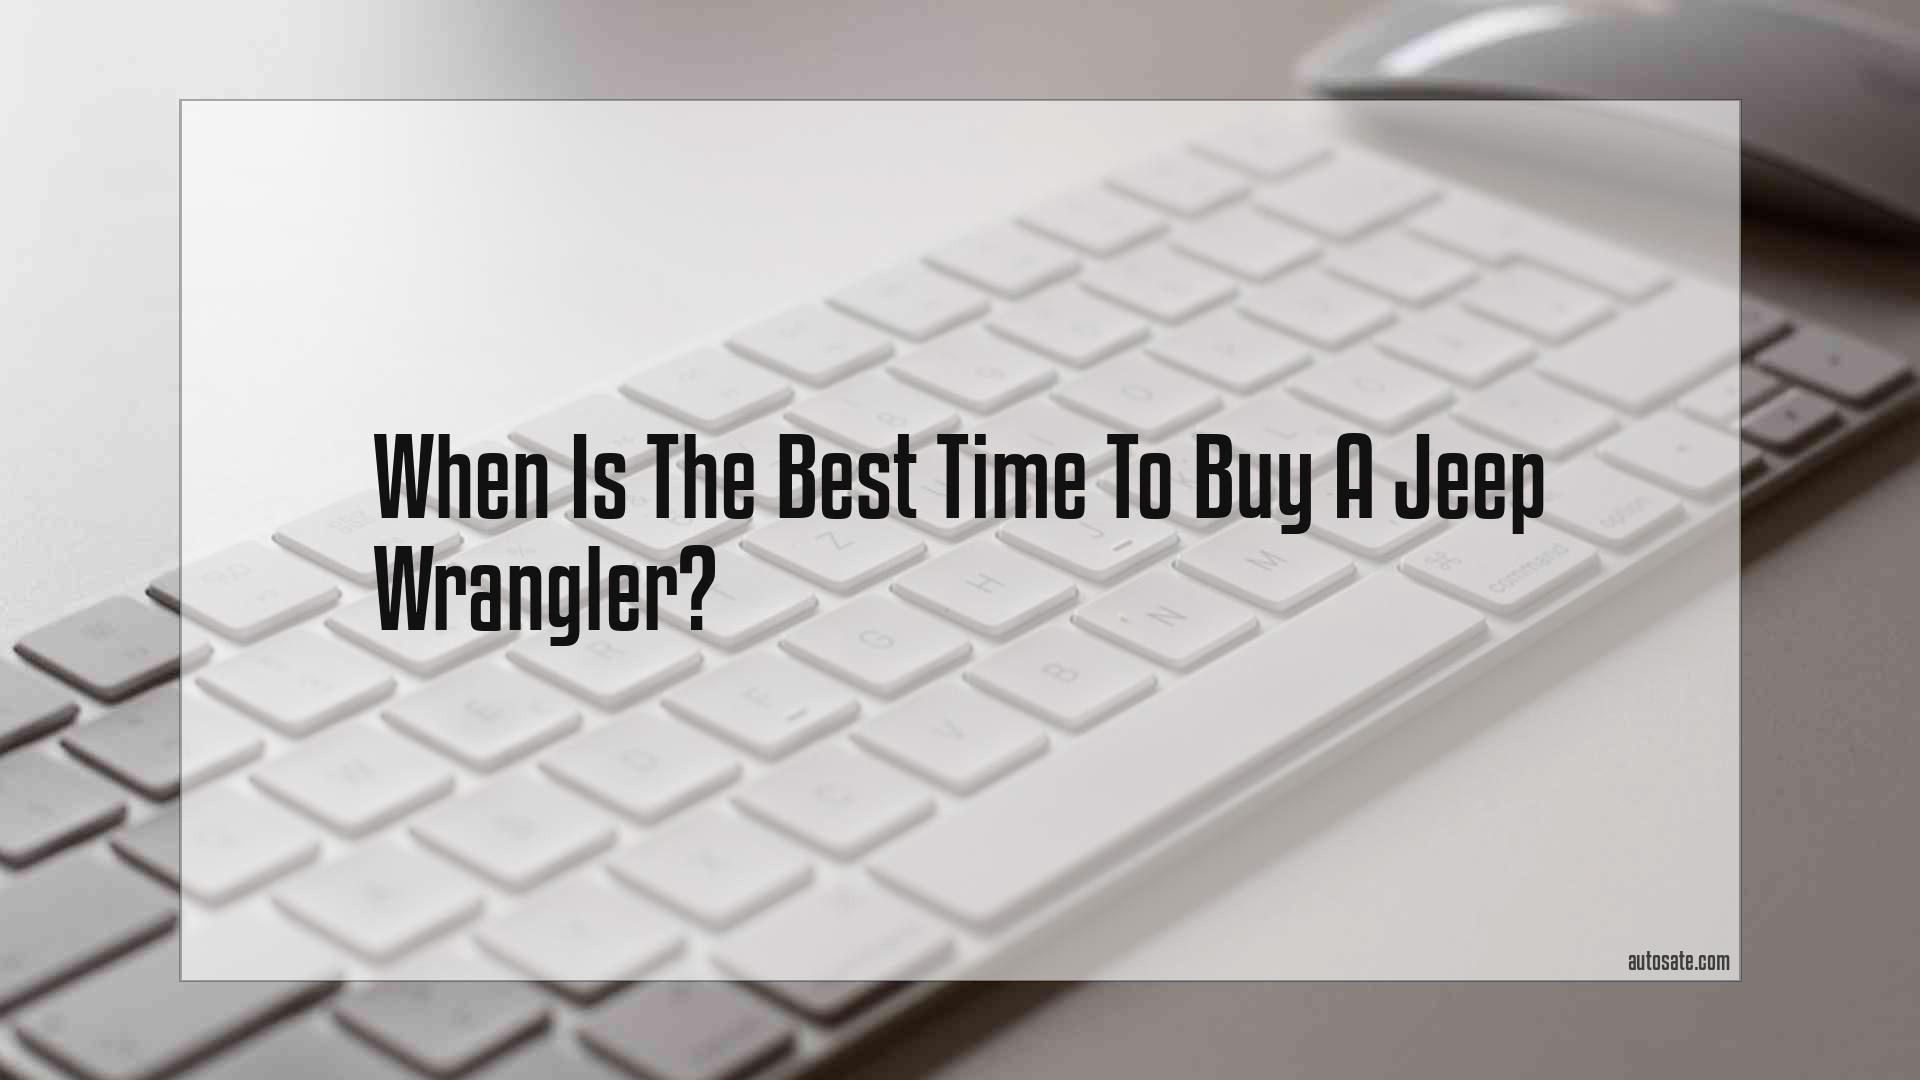 When Is The Best Time To Buy A Jeep Wrangler